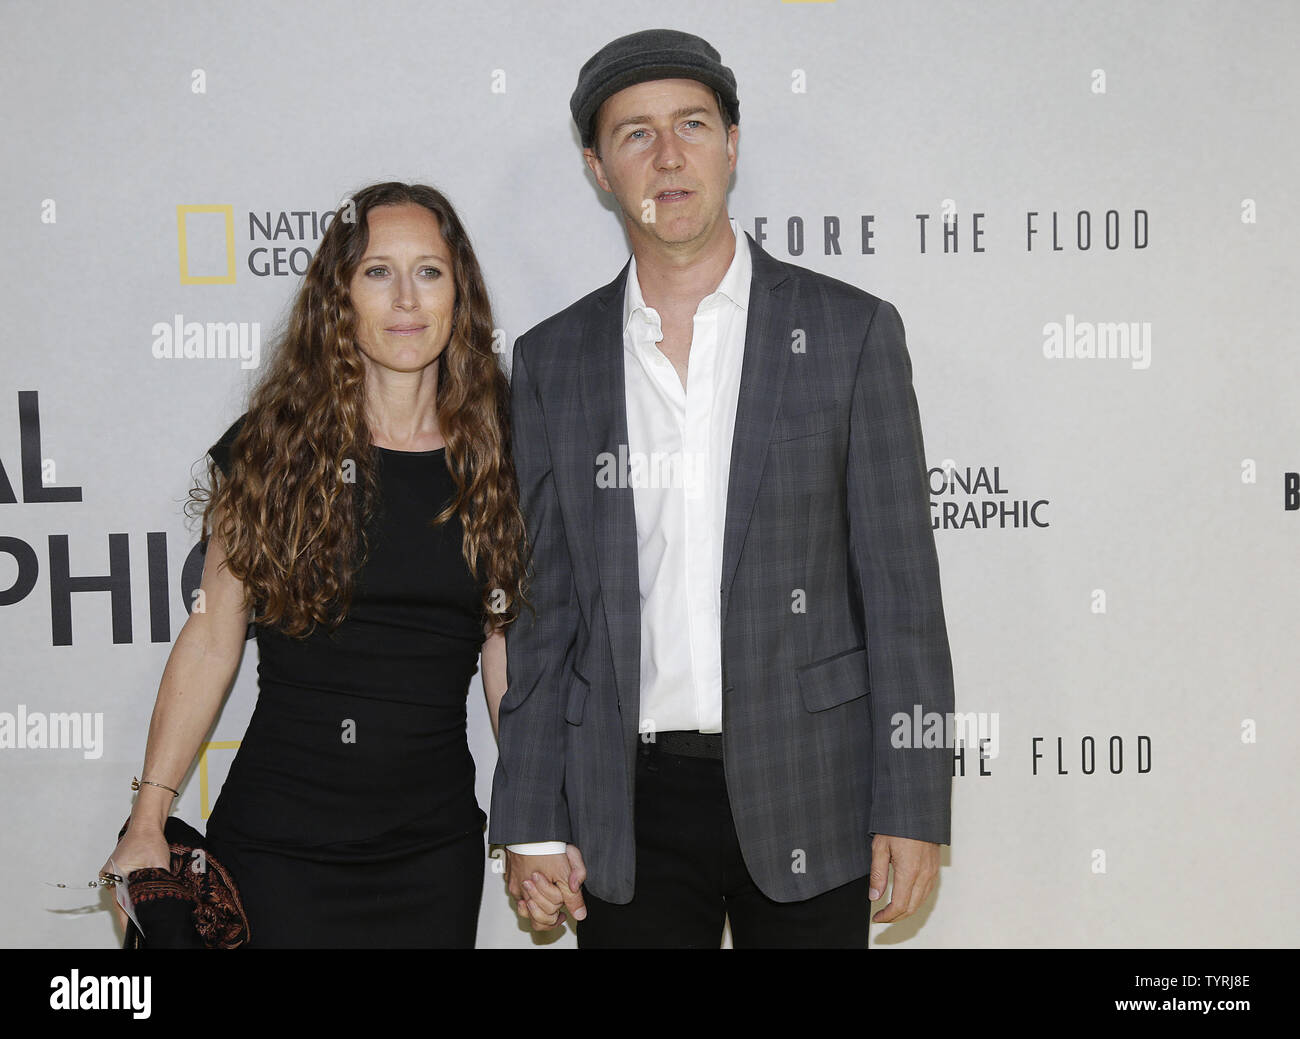 Shauna Robertson And Edward Norton Arrives On The Red Carpet At The Before The Flood New York Screening At United Nations Headquarters On October 16 In New York City Photo By